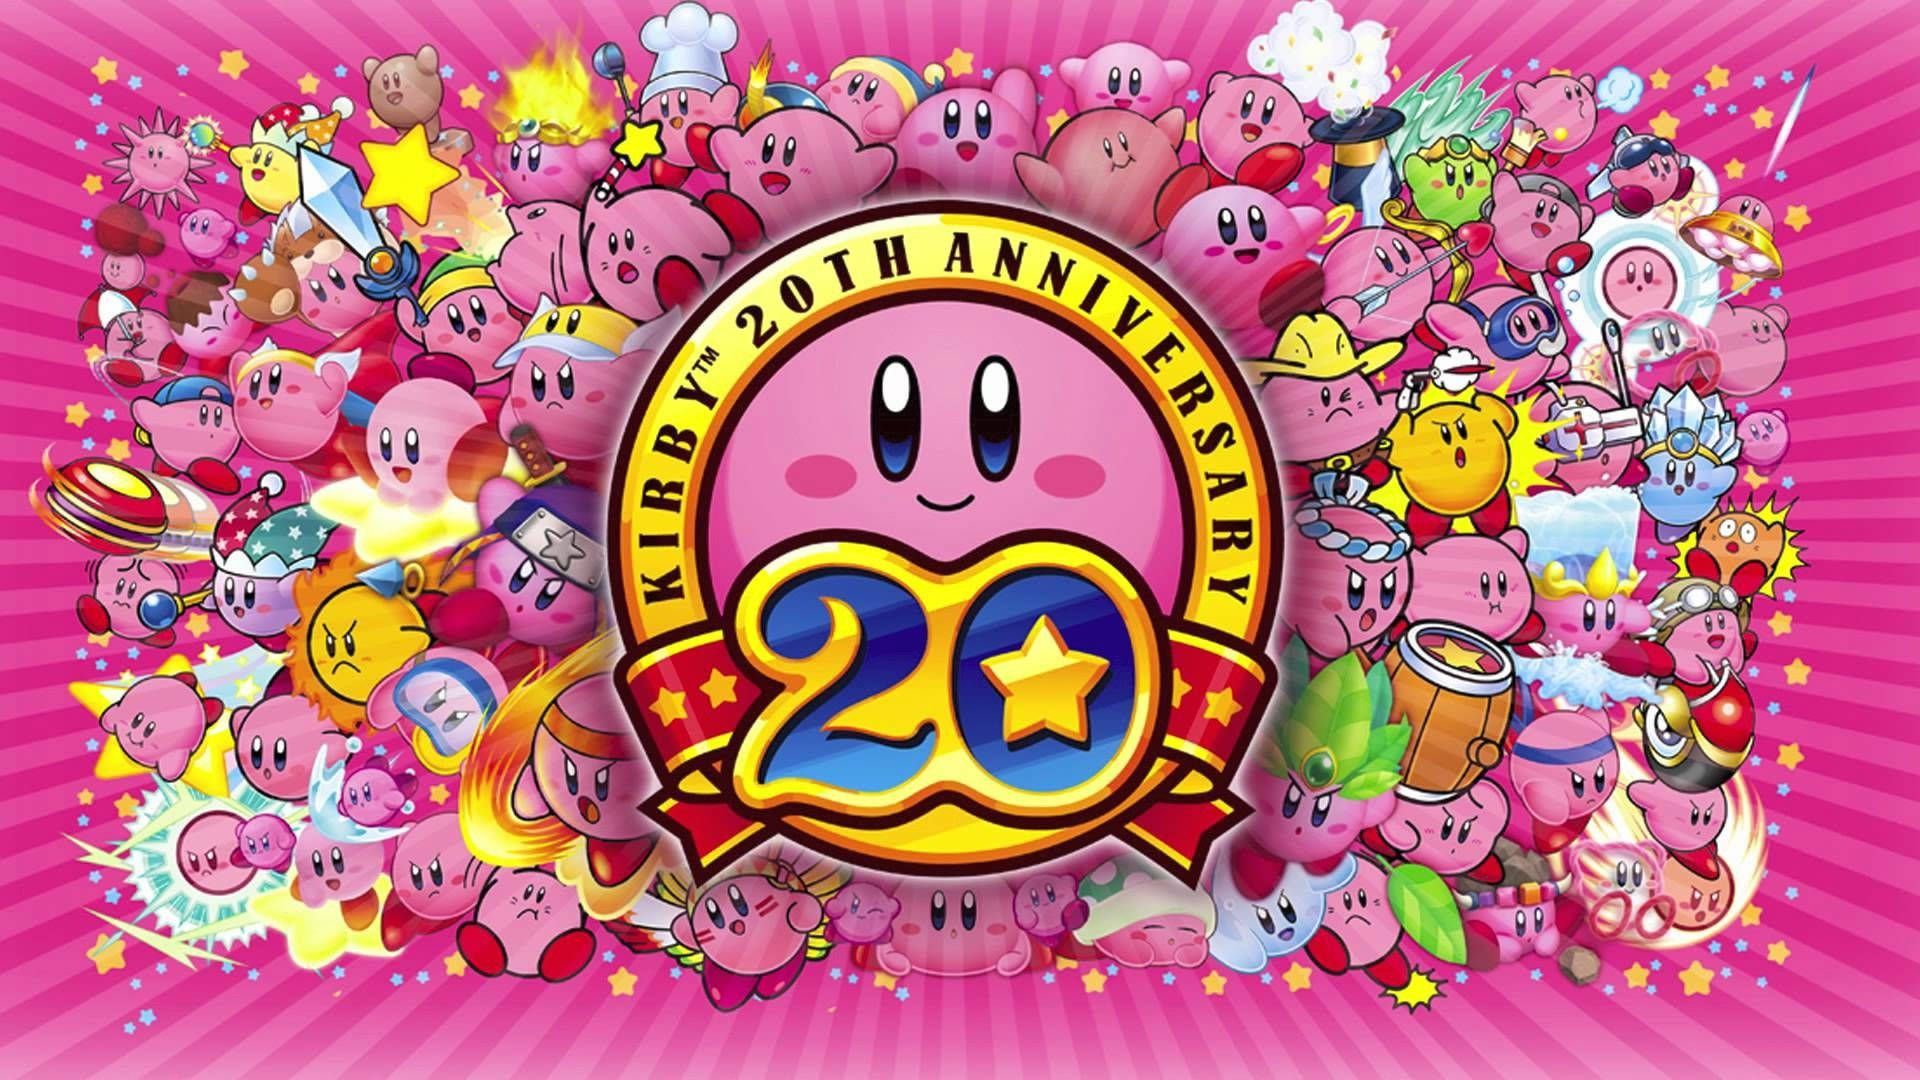 Hd Anniversary Cover Of Kirby